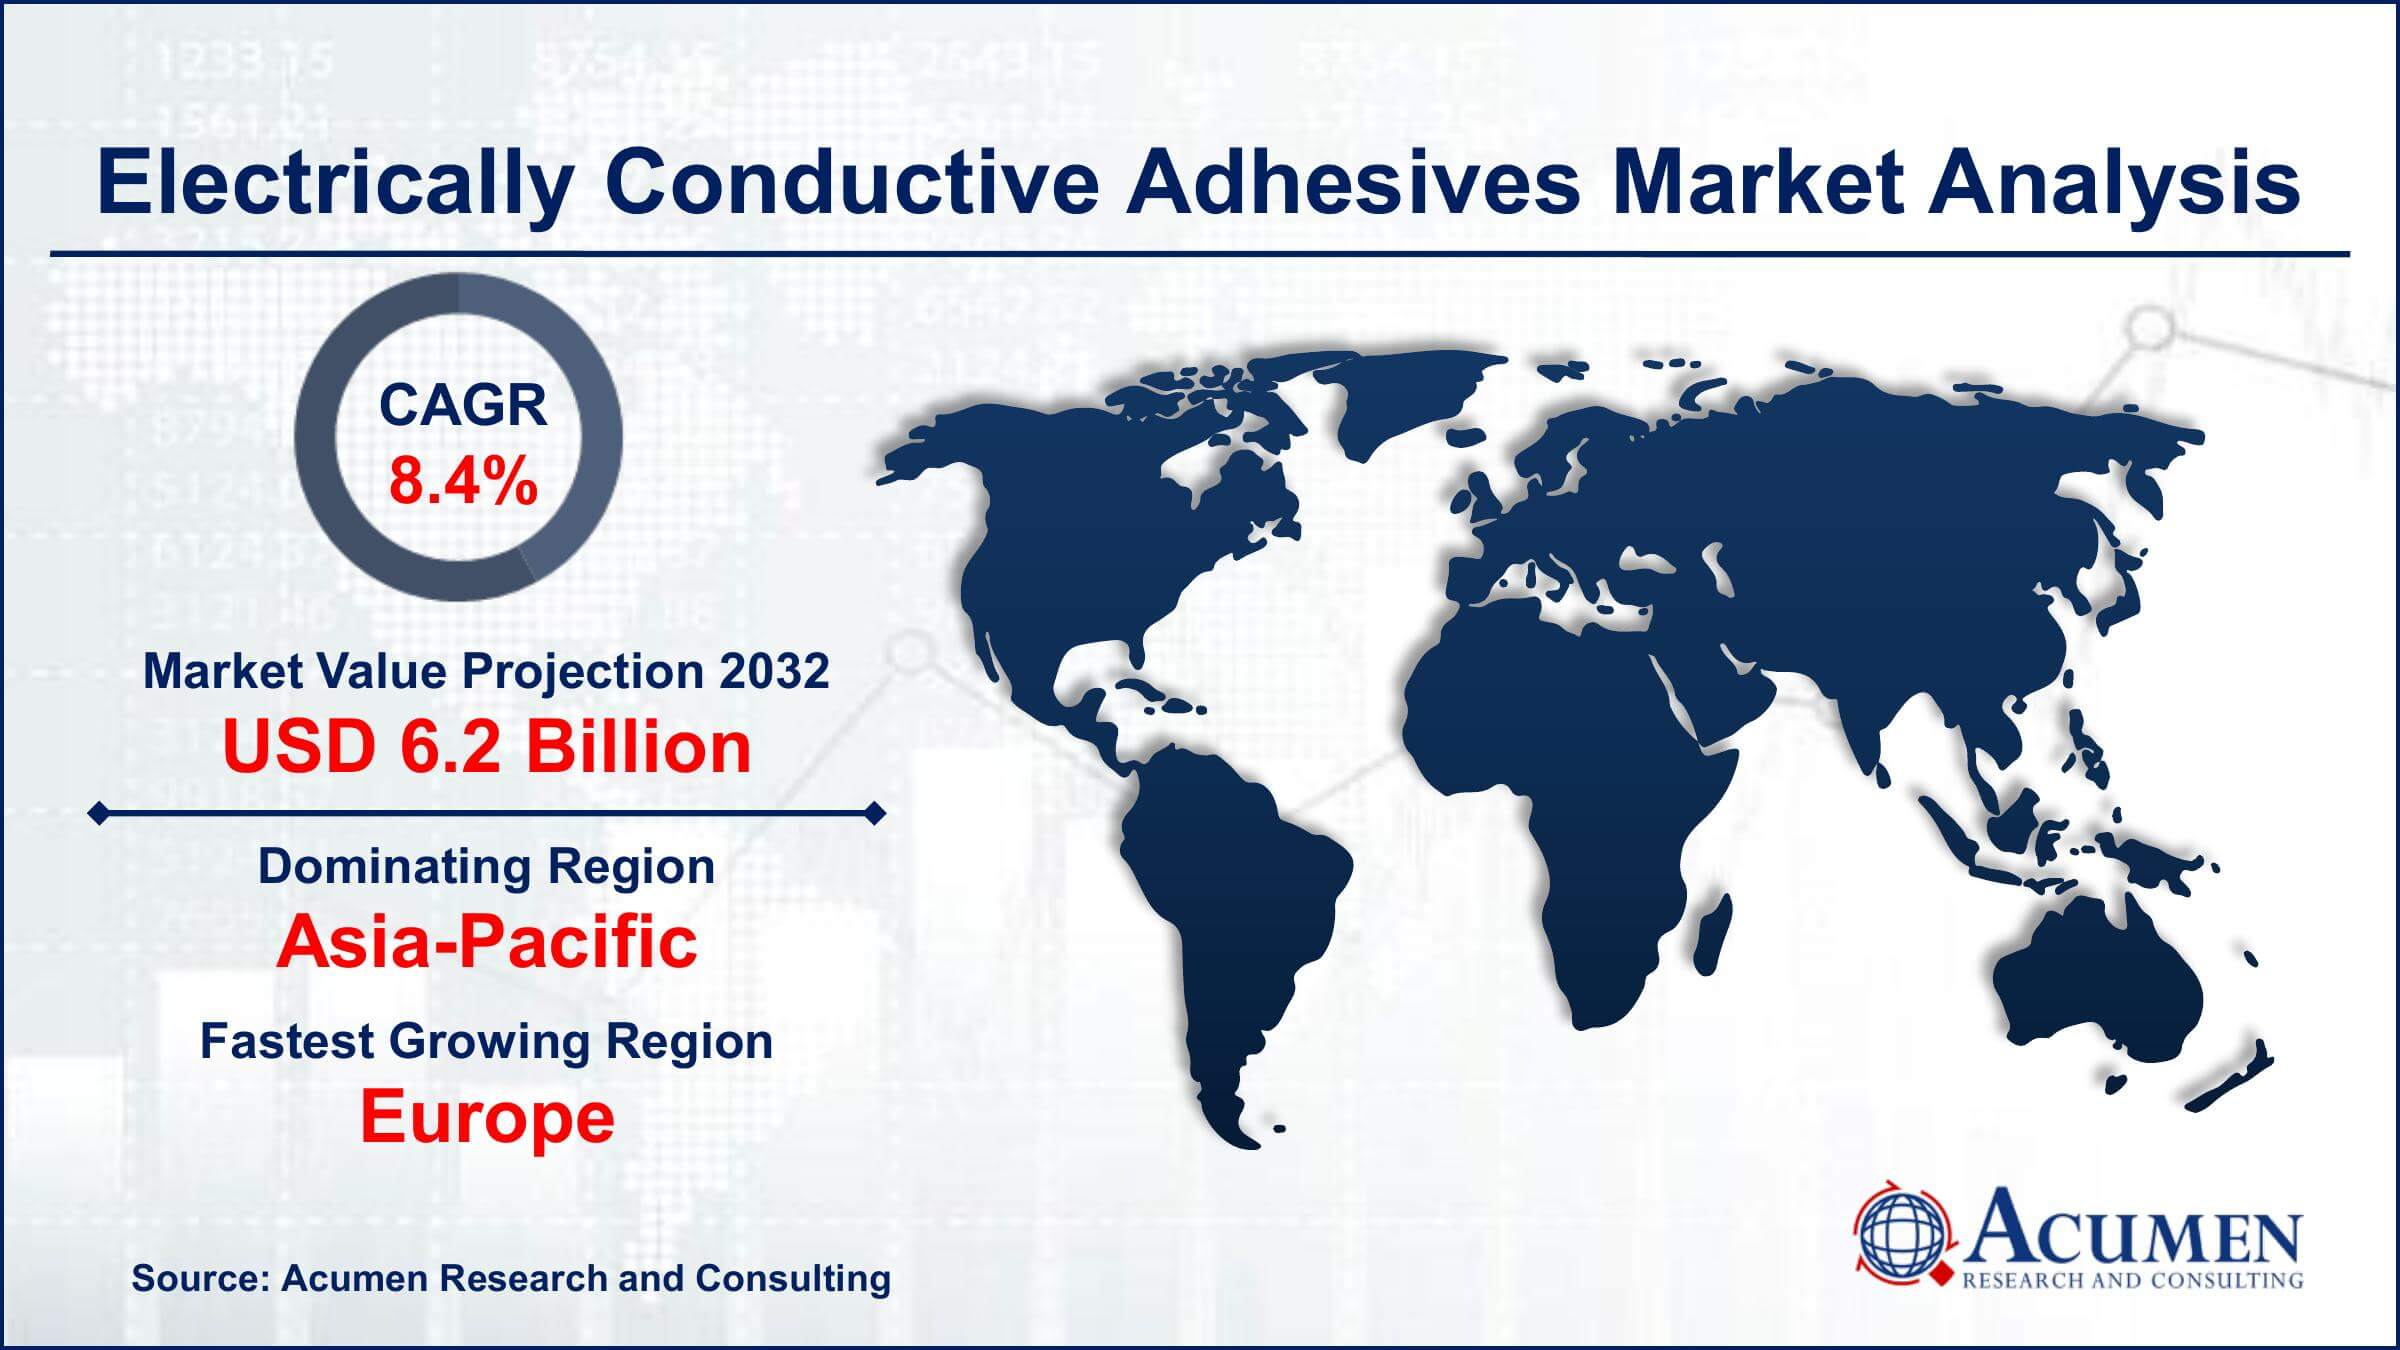 Global Electrically Conductive Adhesives Market Trends